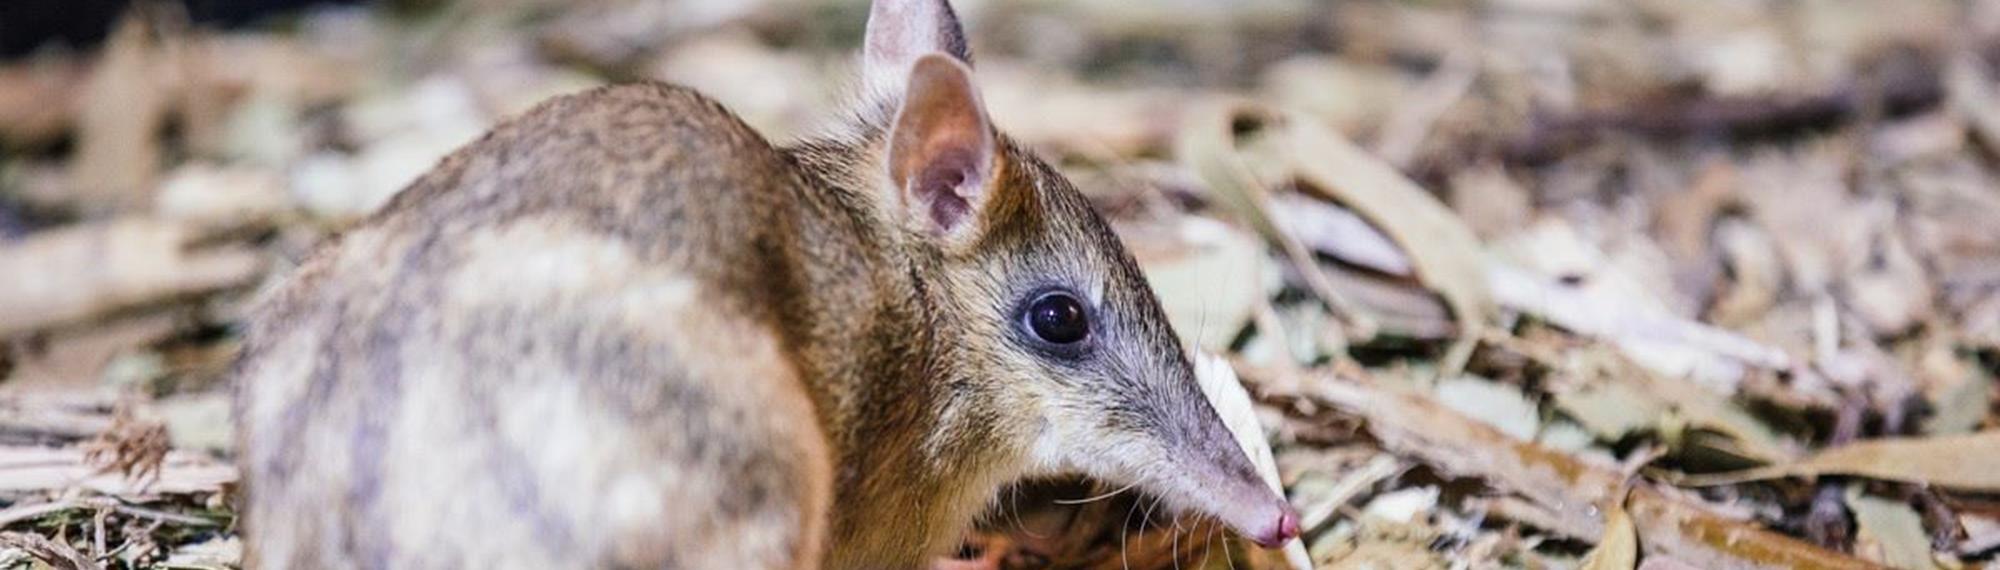 Eastern Barred Bandicoot looking at the camera while standing in some leaf litter.  